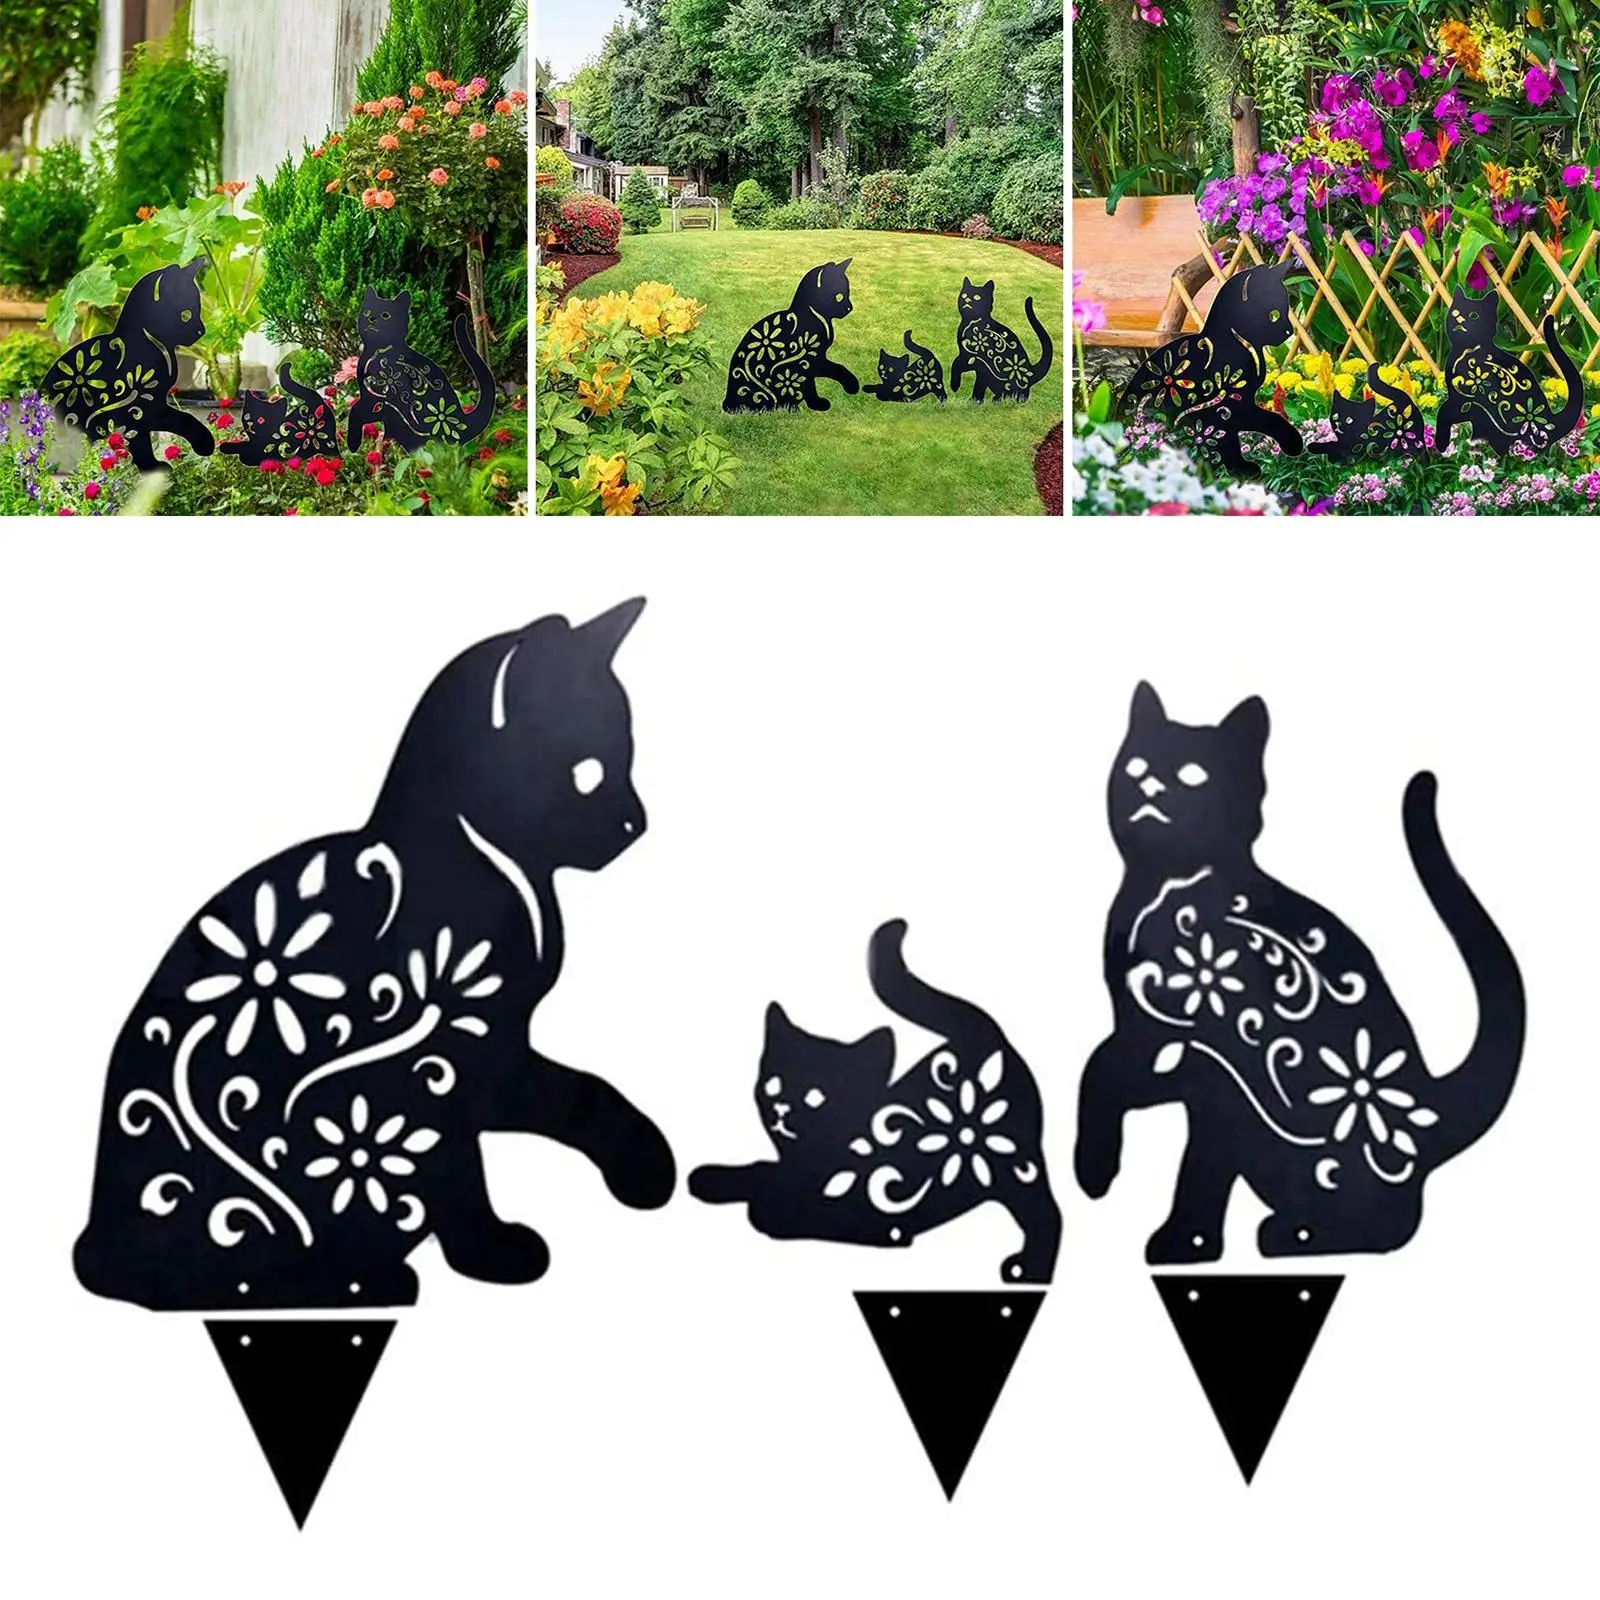 3Pieces Garden Cat Stakes Animals Statue for Home Outdoor Yard Decor Arts